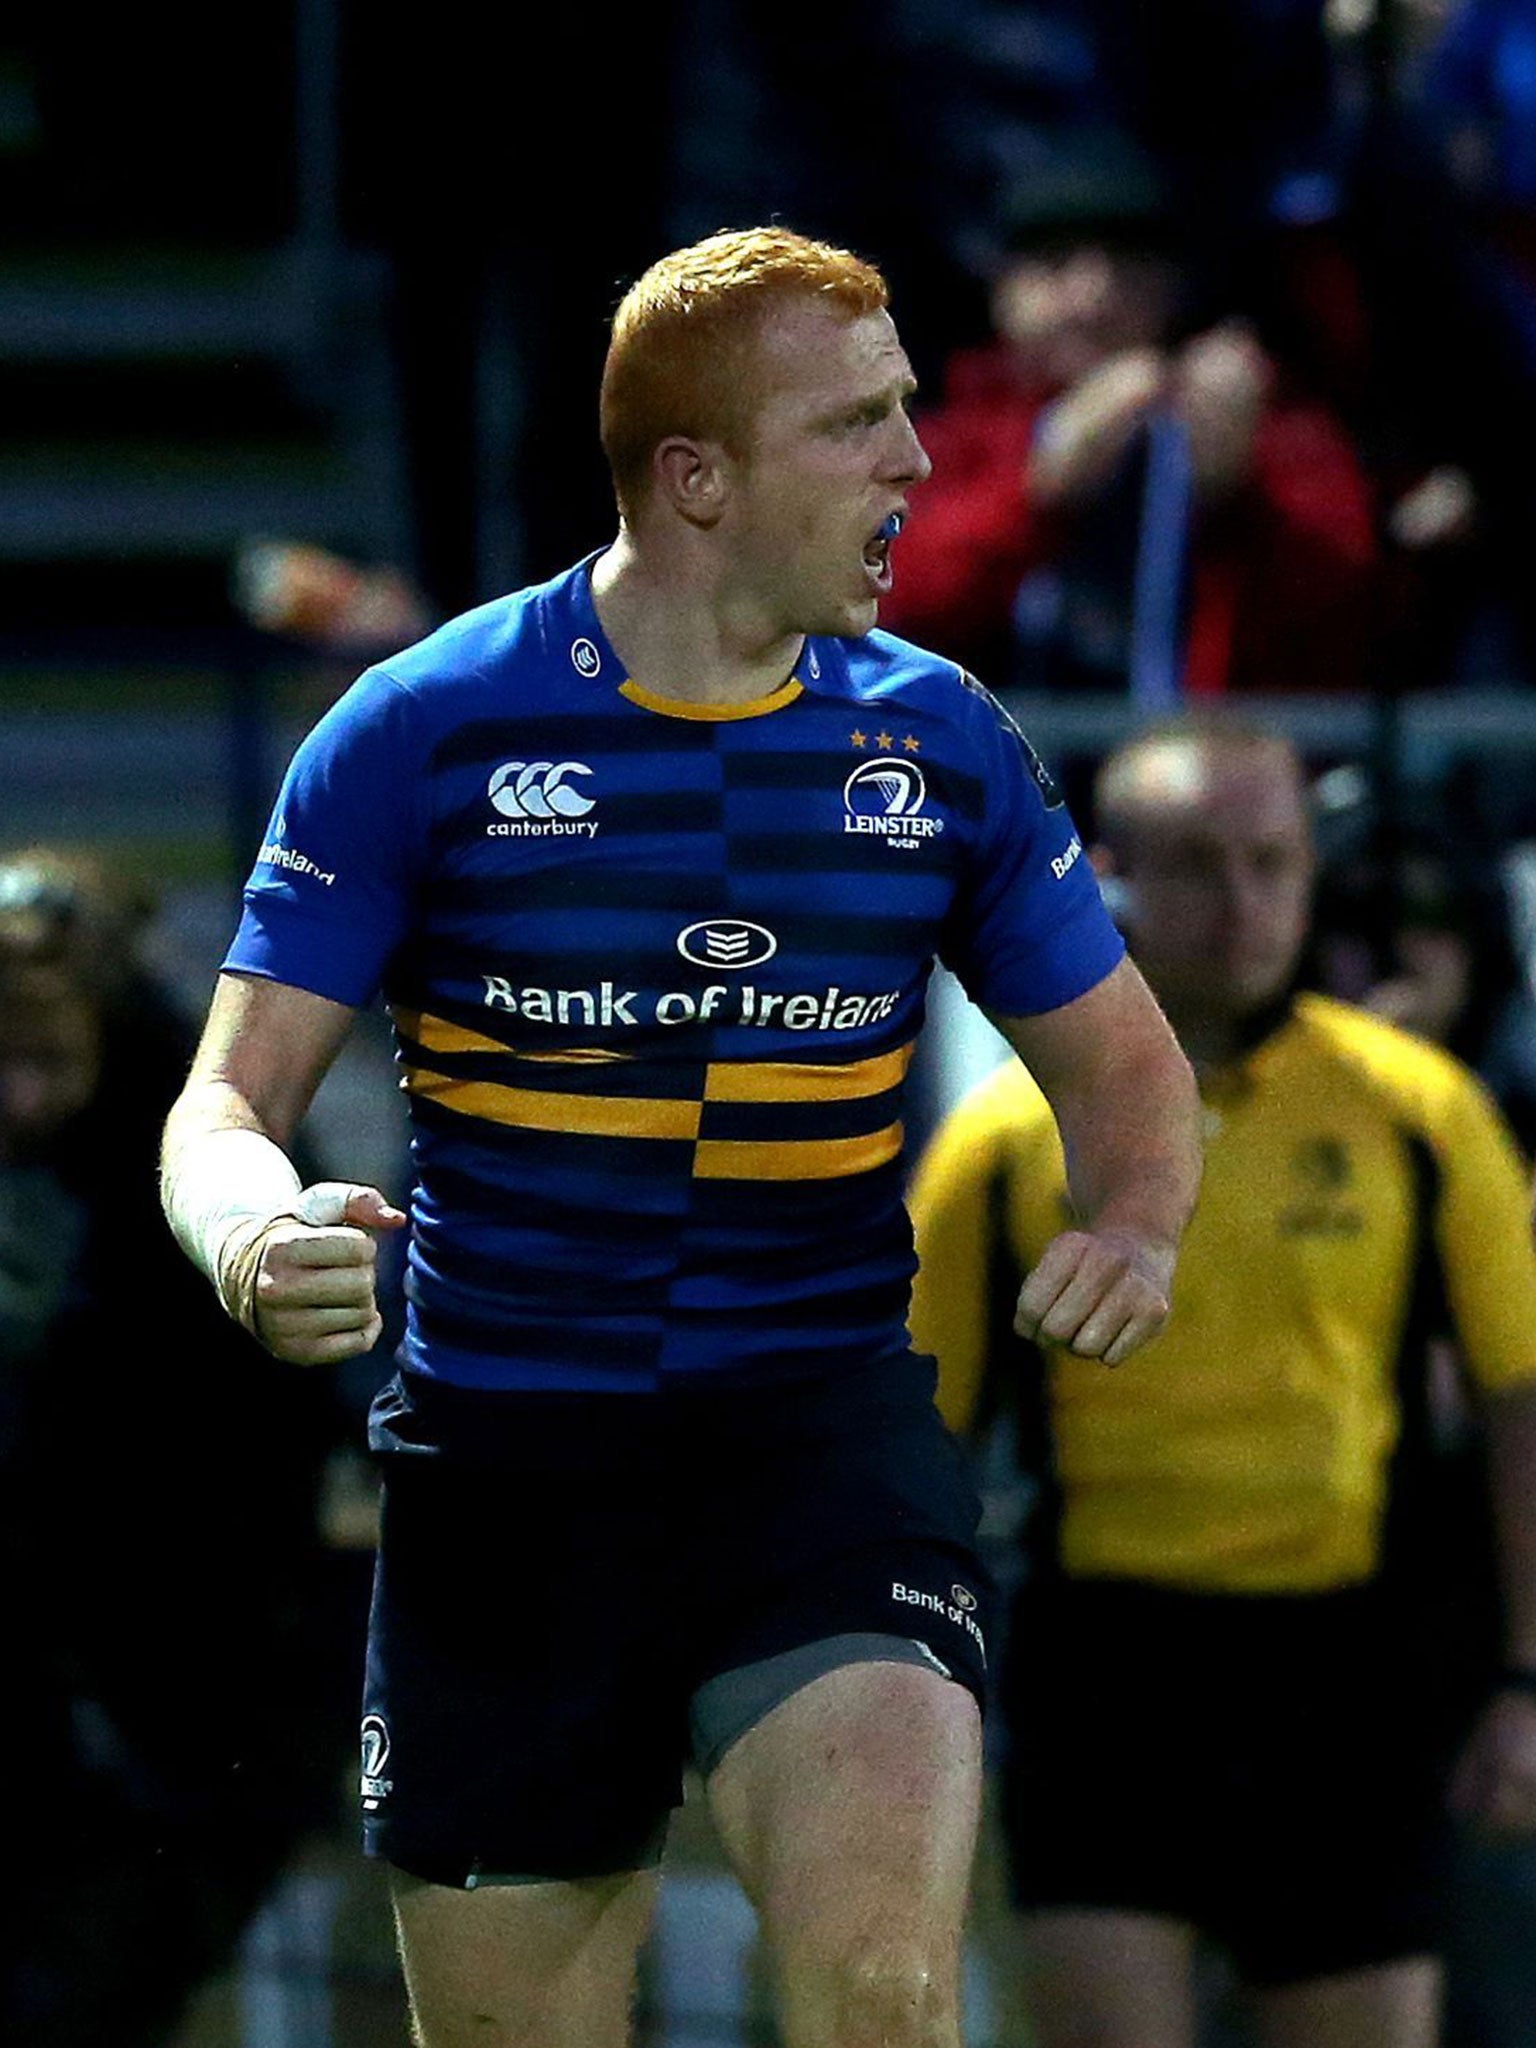 Darragh Fanning scored two tries for Leinster